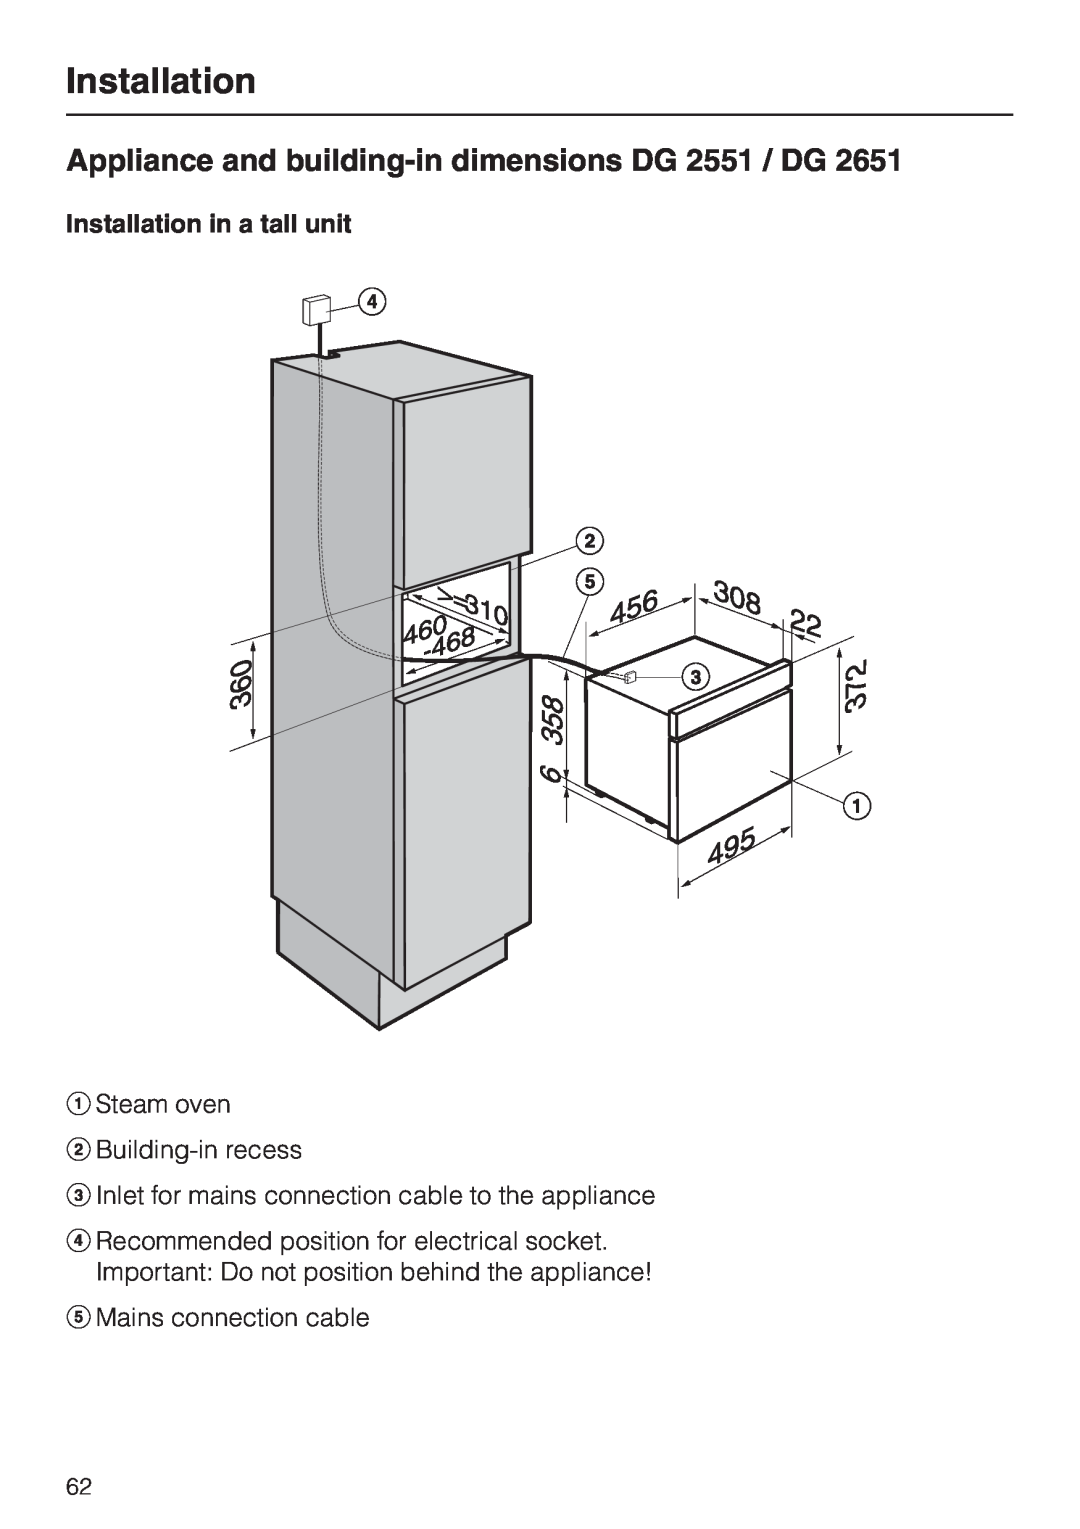 Miele DG2661, DG 2651, DG 2561 Appliance and building-in dimensions DG 2551 / DG, Installation in a tall unit 